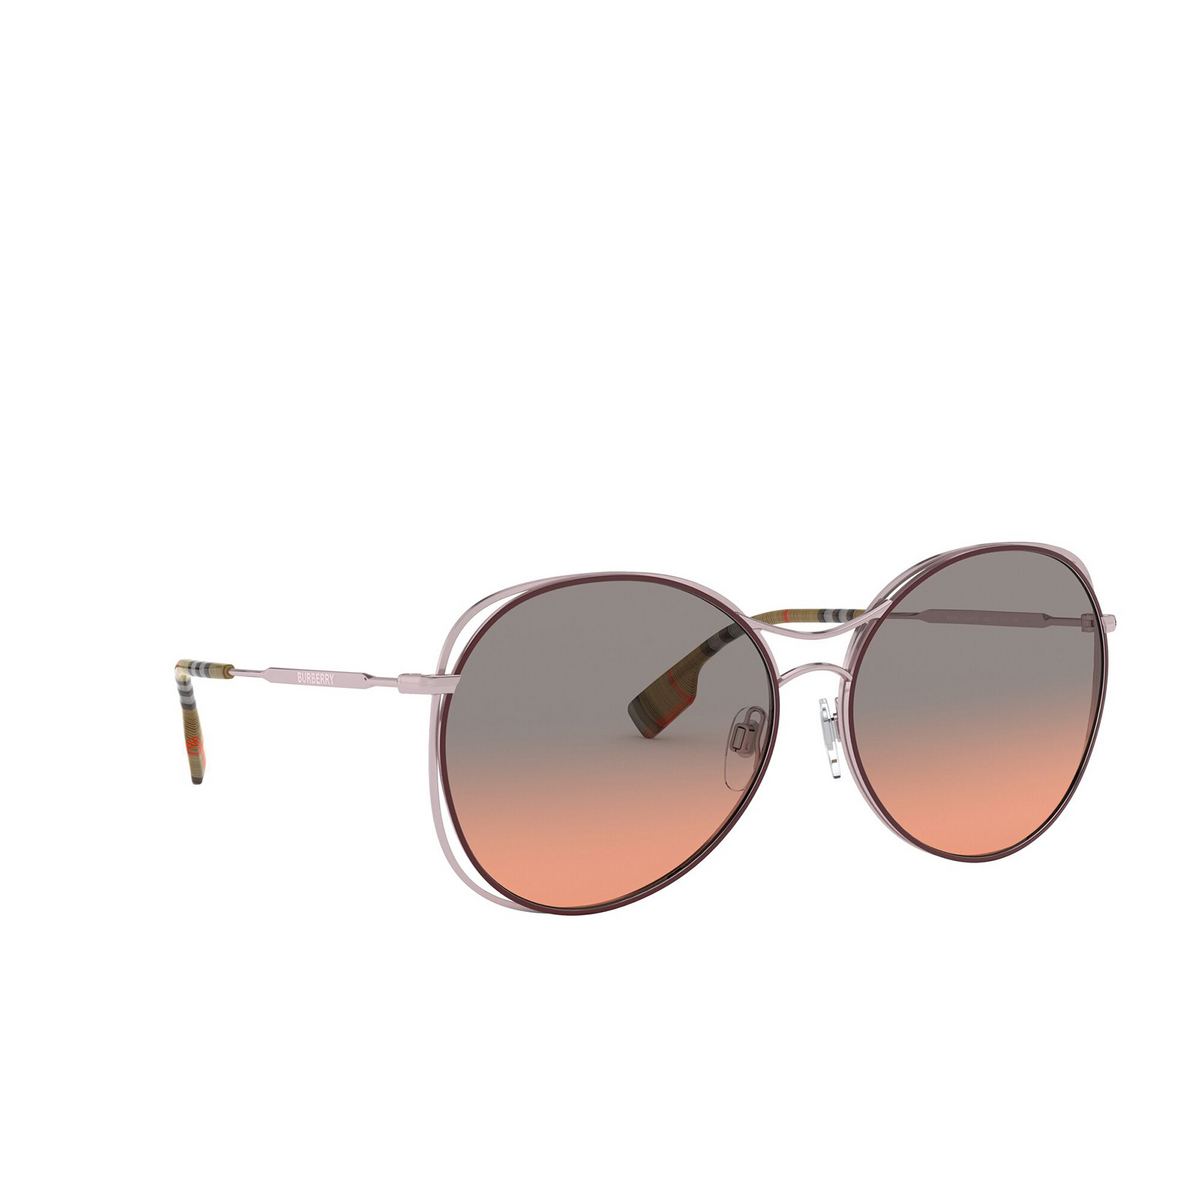 Burberry® Round Sunglasses: BE3105 color Pink / Bordeaux 118818 - three-quarters view.